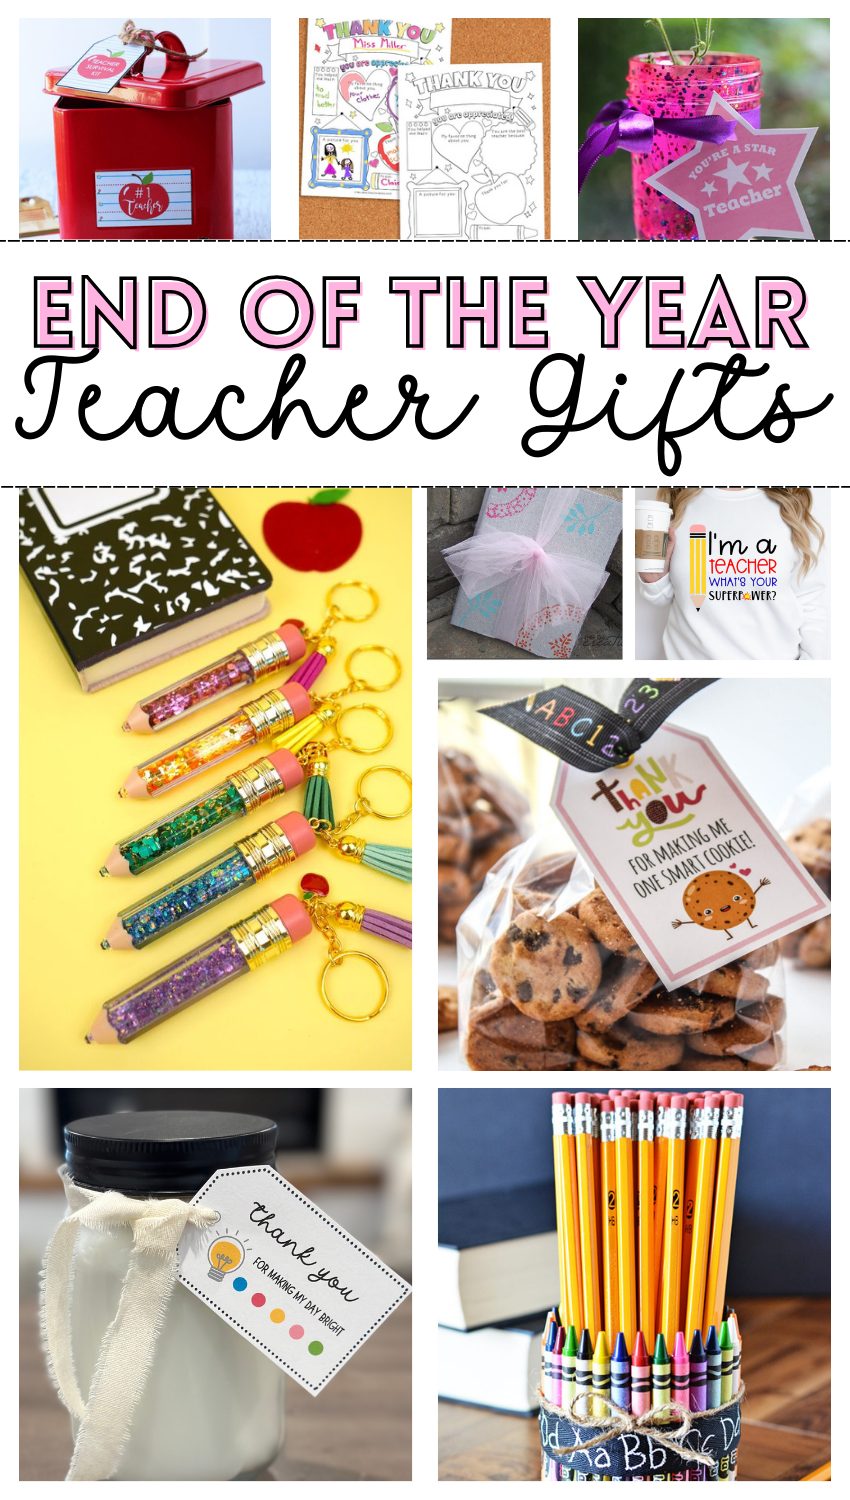 End of the Year Teacher Gifts